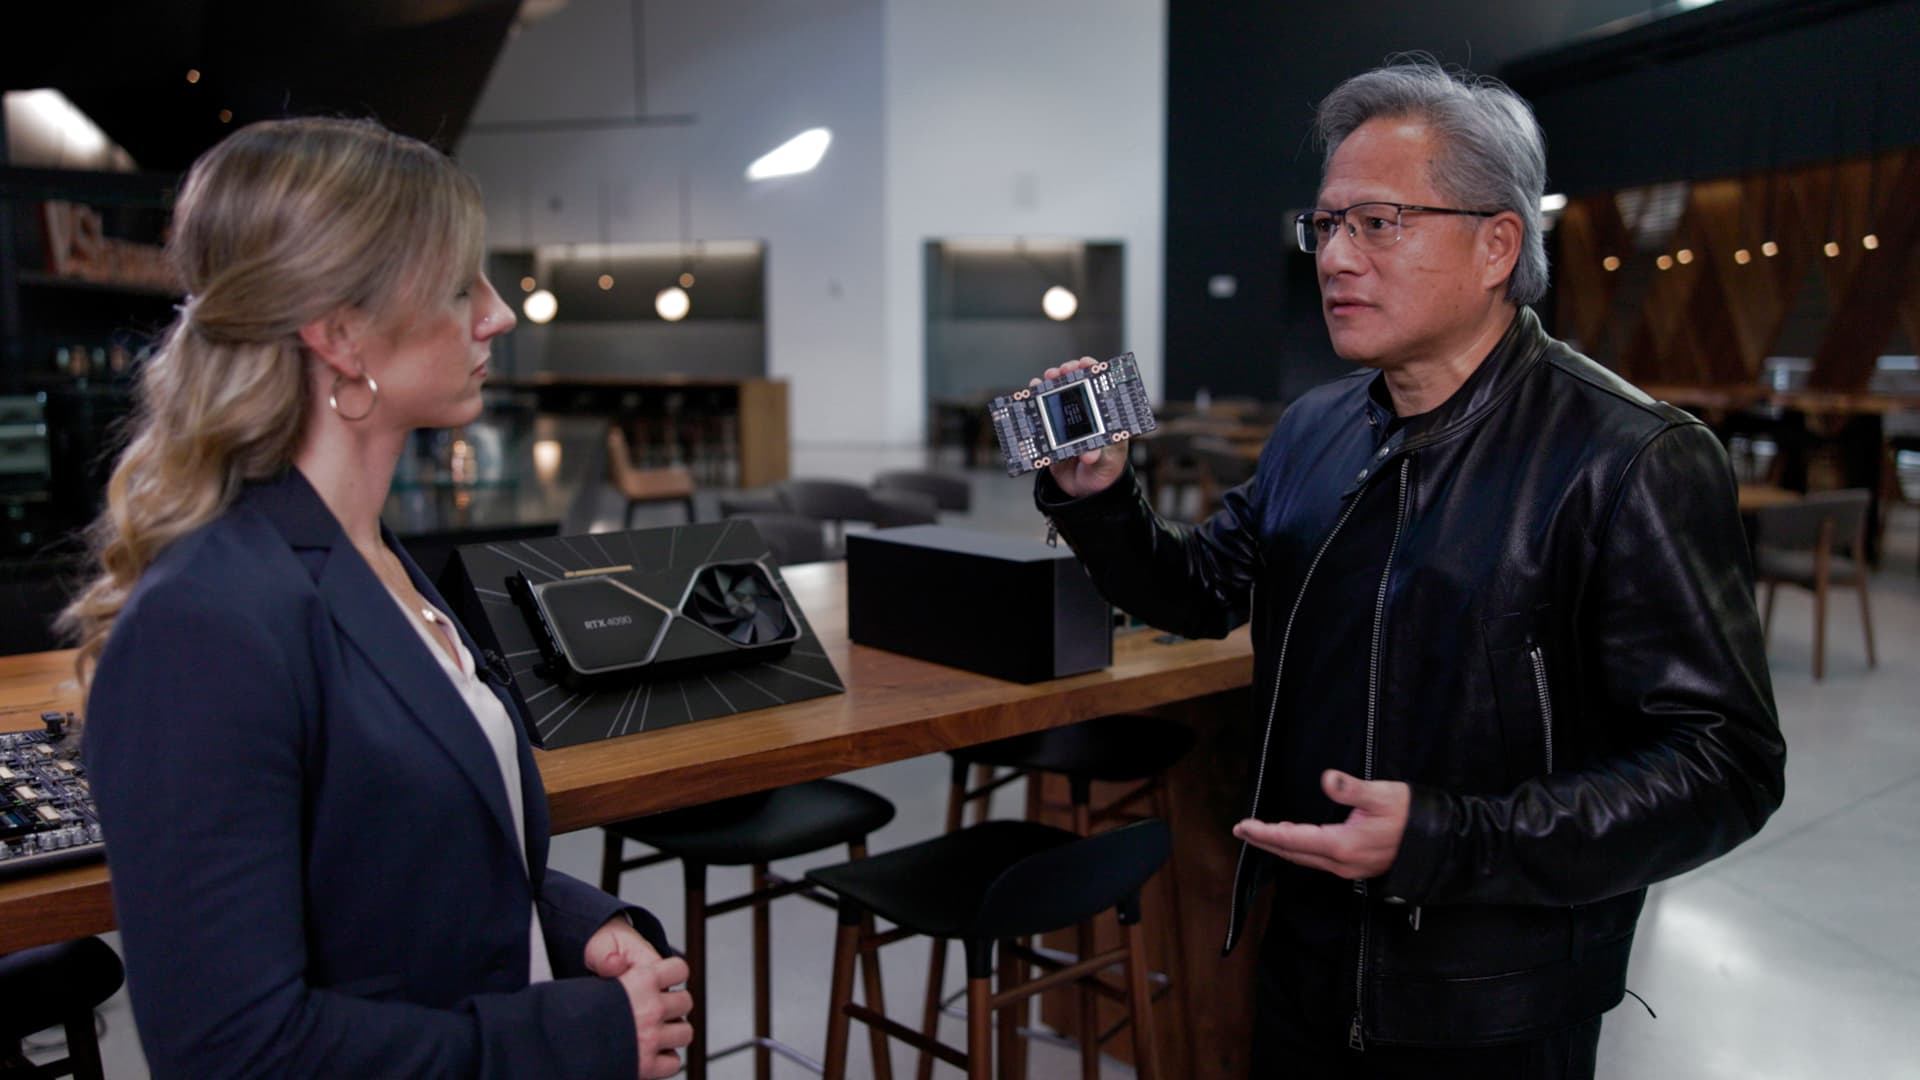 Nvidia CEO Jensen Huang's big bet on A.I. is paying off as his core technology powers ChatGPT 